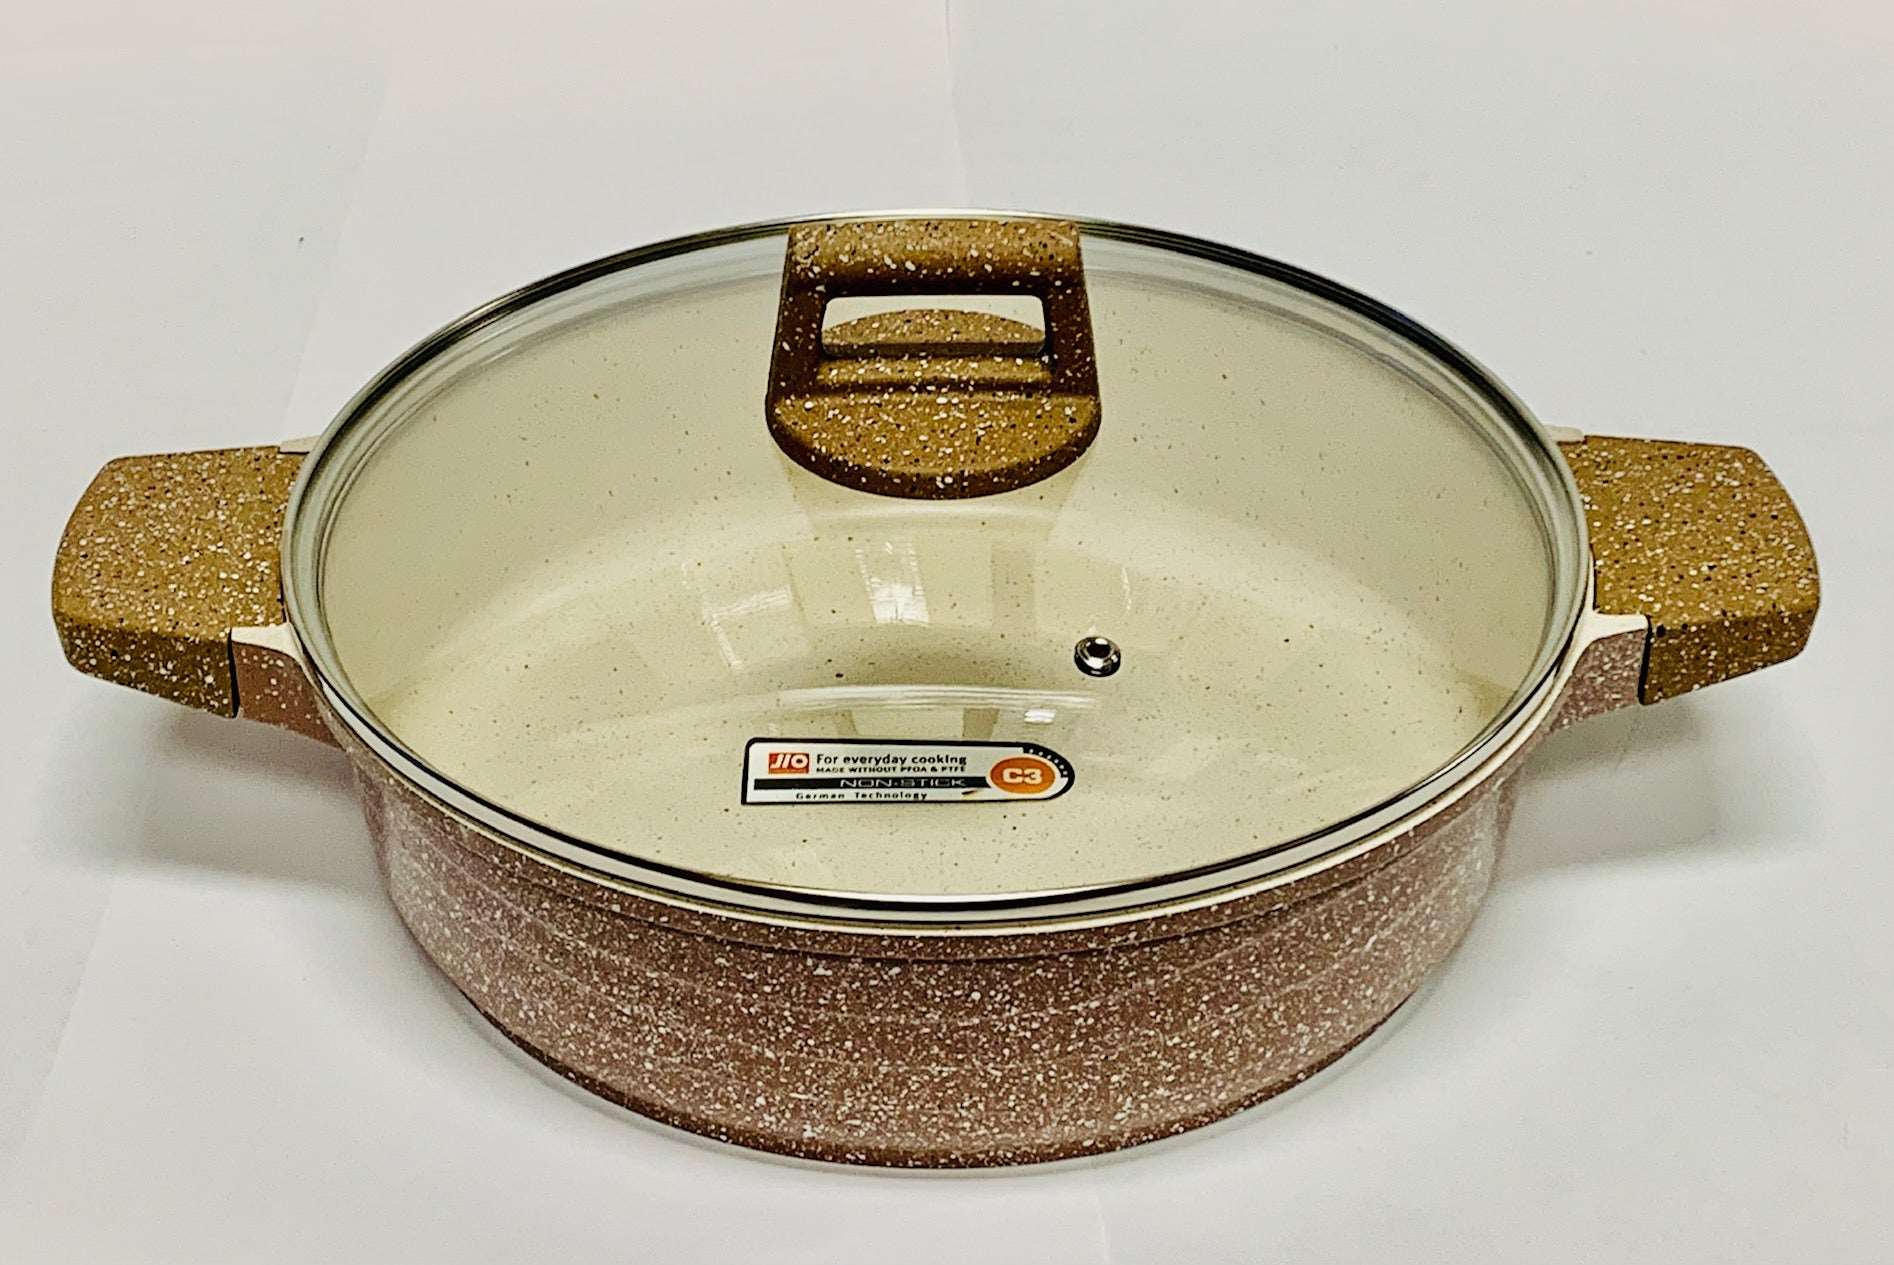 Granite Cookware 28cm Casserole Brown 100% Eco Friendly with Glass Cover - Royal Gift